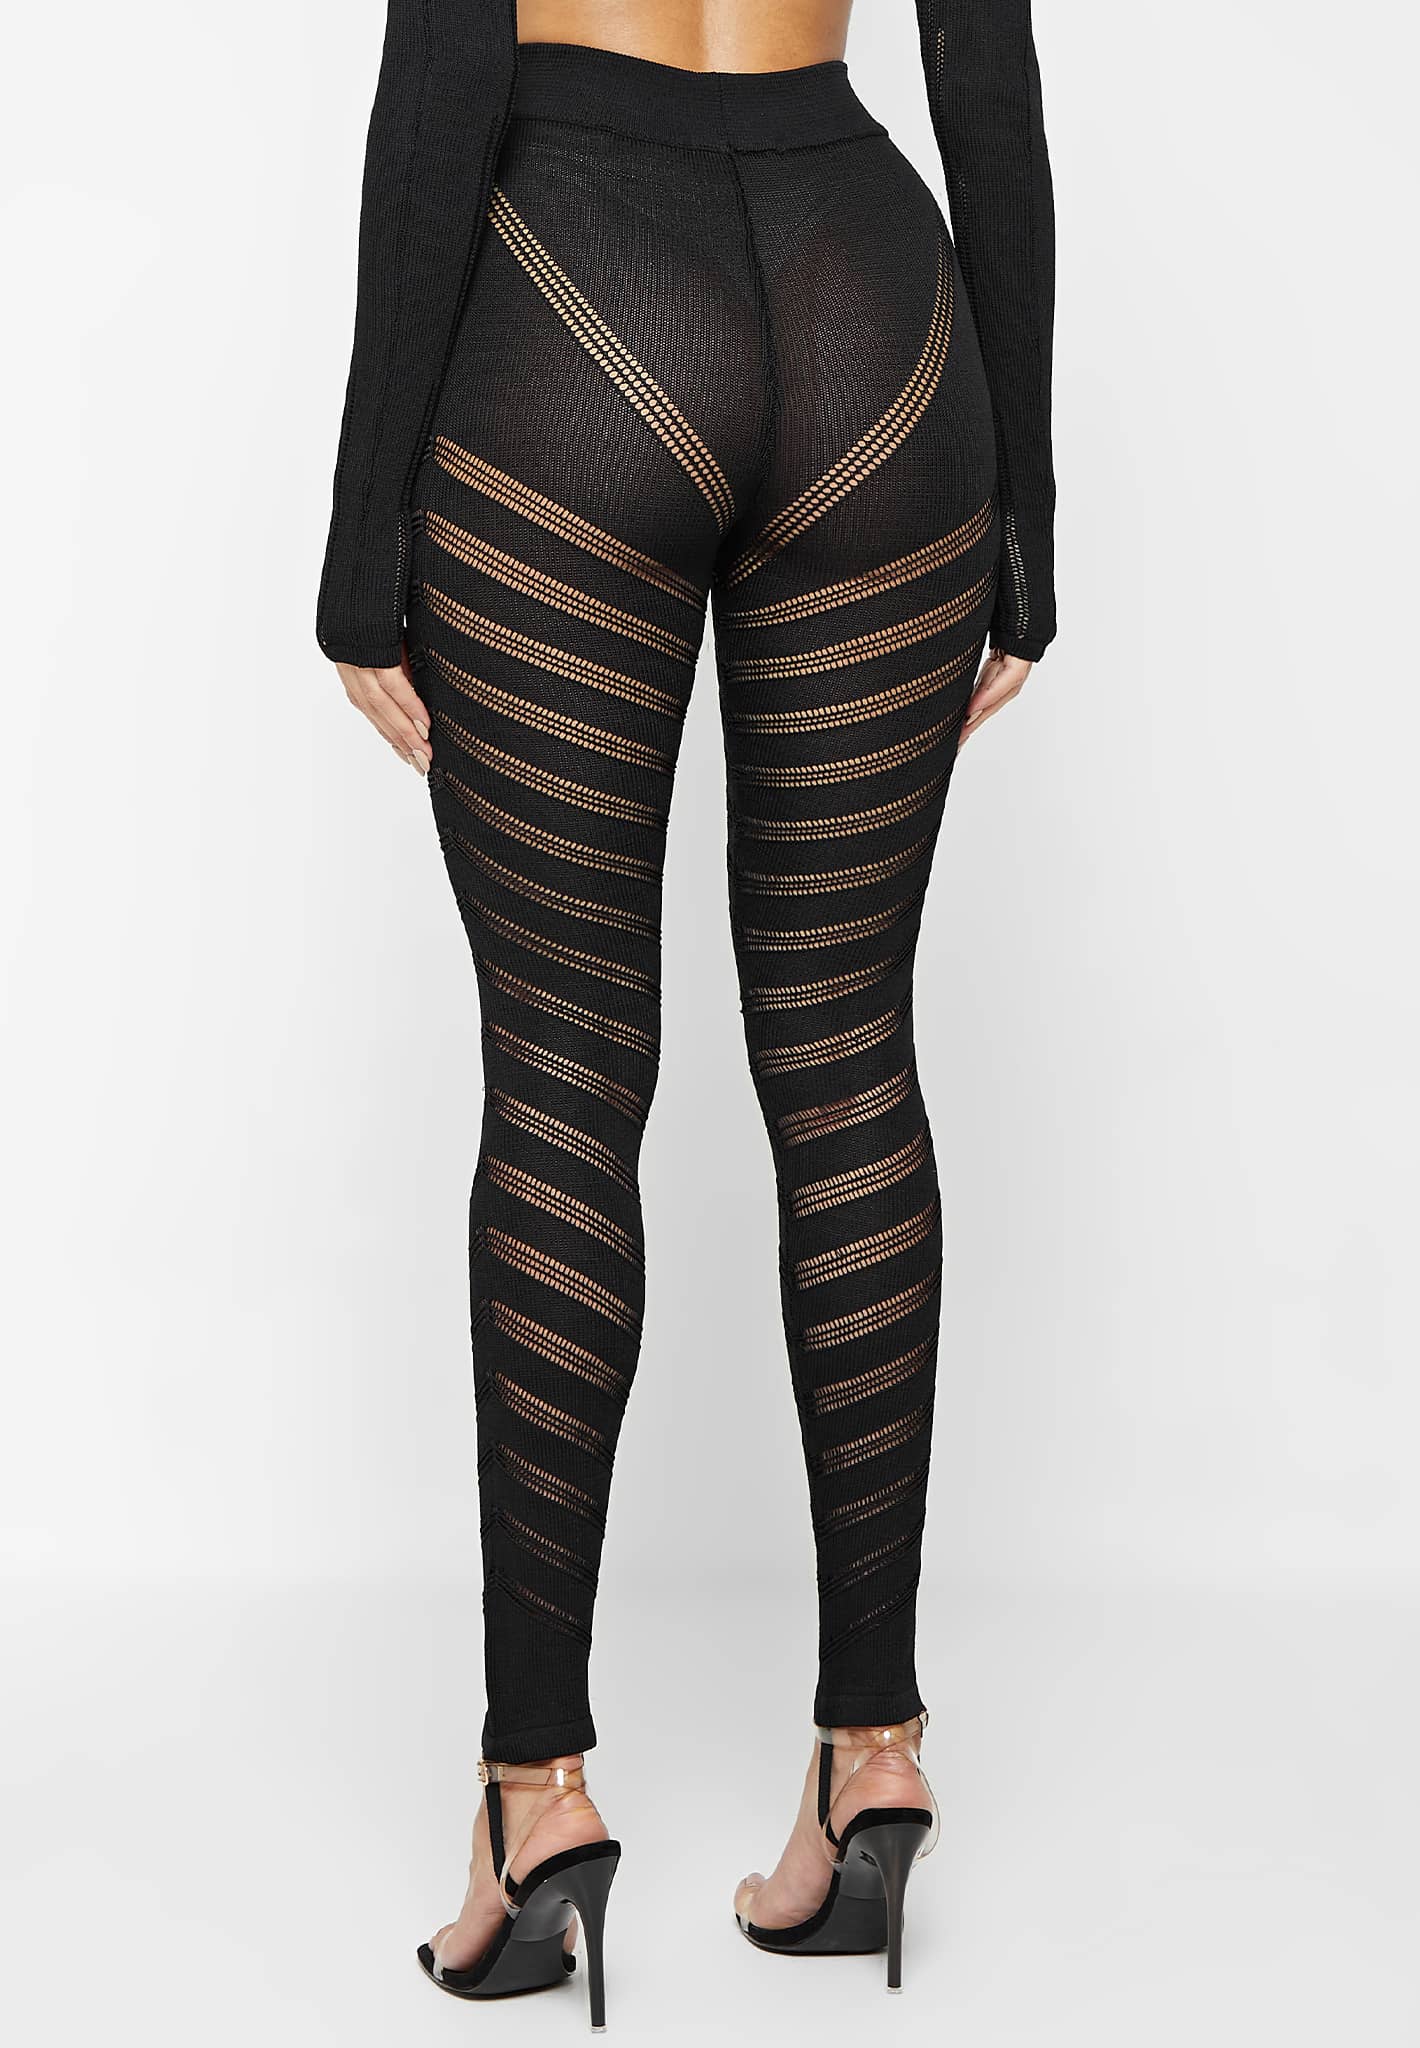 Buy Black knitted fabric leggings with strips: leggings, black color,  knitted fabric, casual style, buy in VOVK online store for 690 UAH.